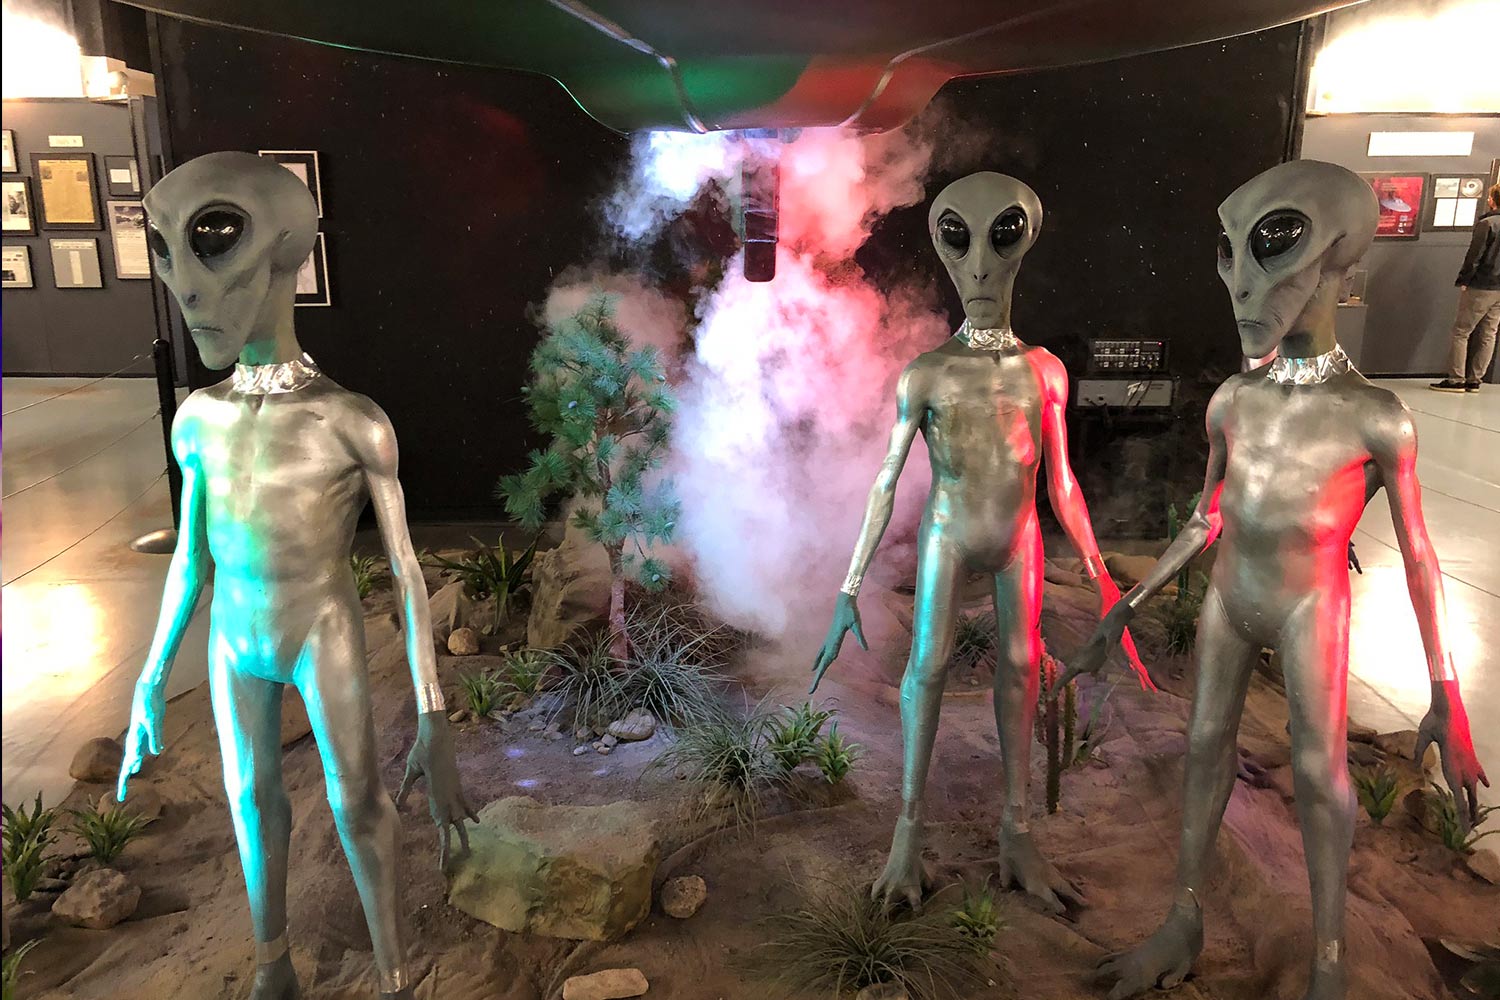 Exhibit of alien statues with smoke behind